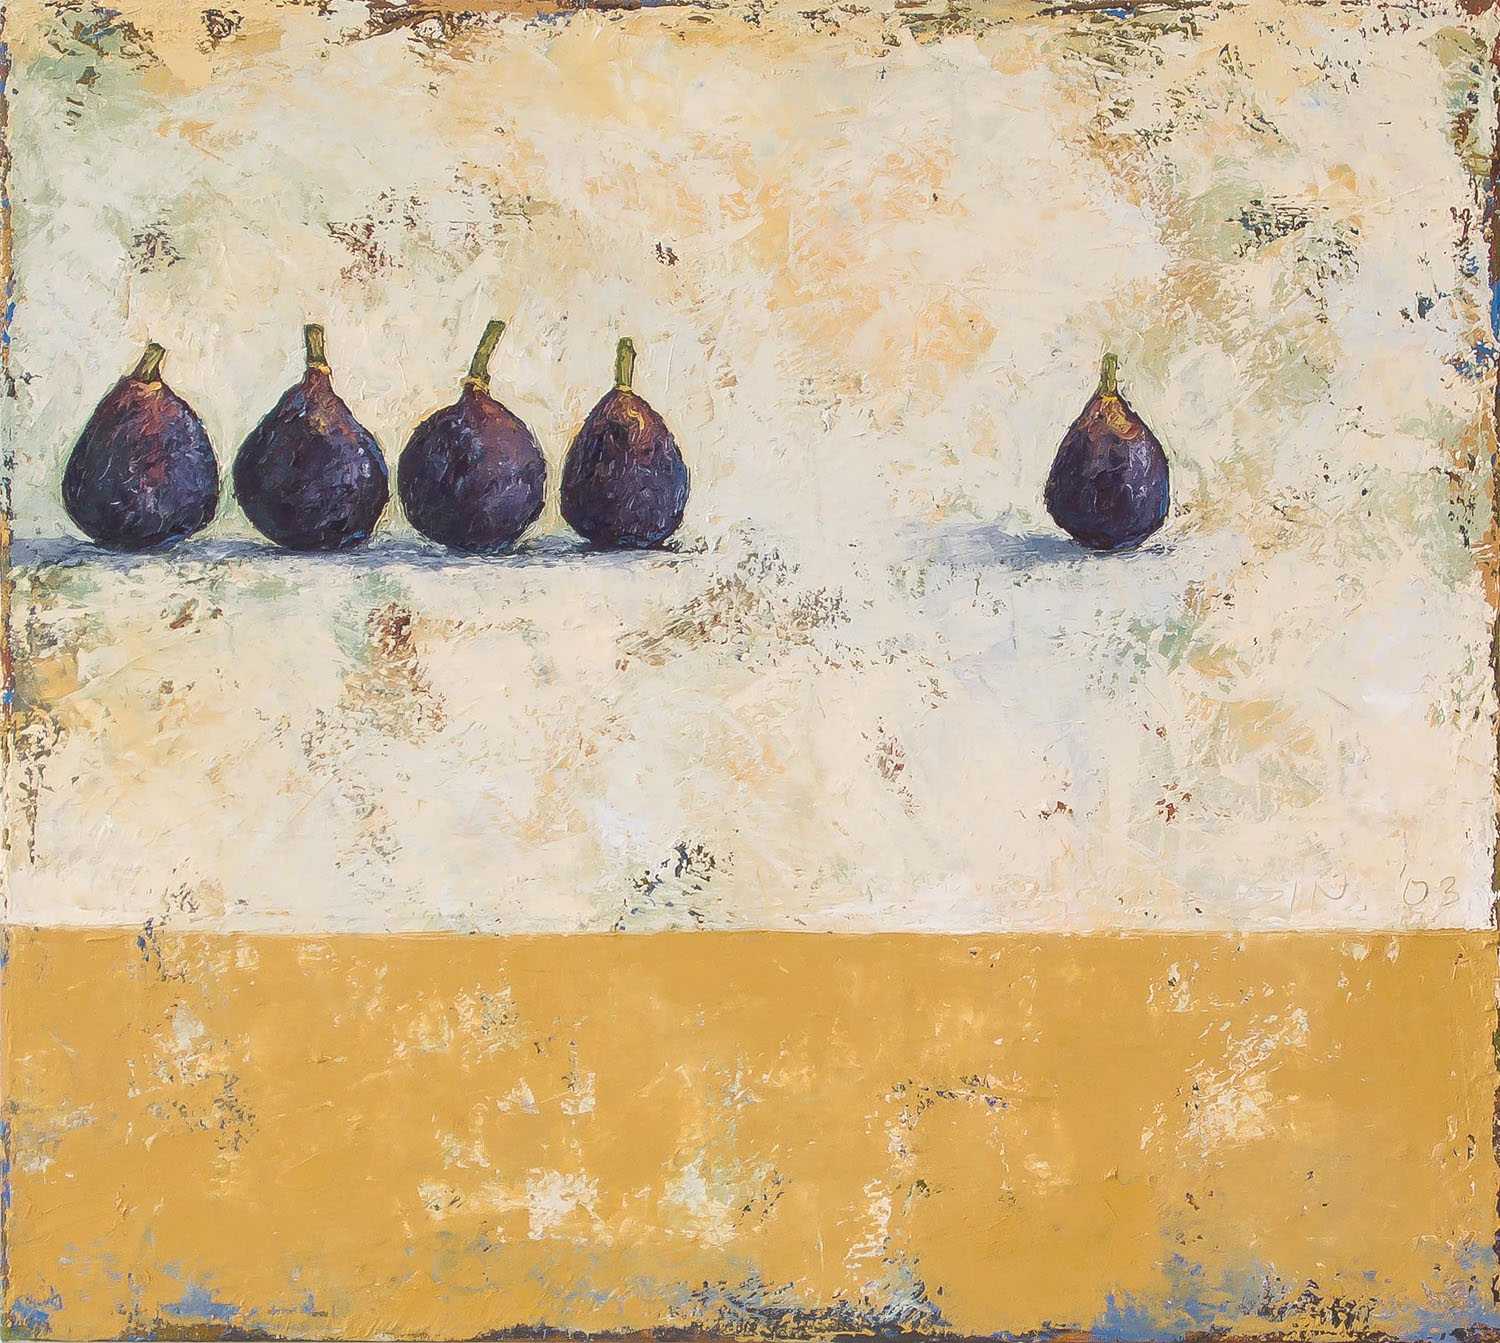   Figs in a Row  2003 oil on panel 18 x 20 inches  Private collection 